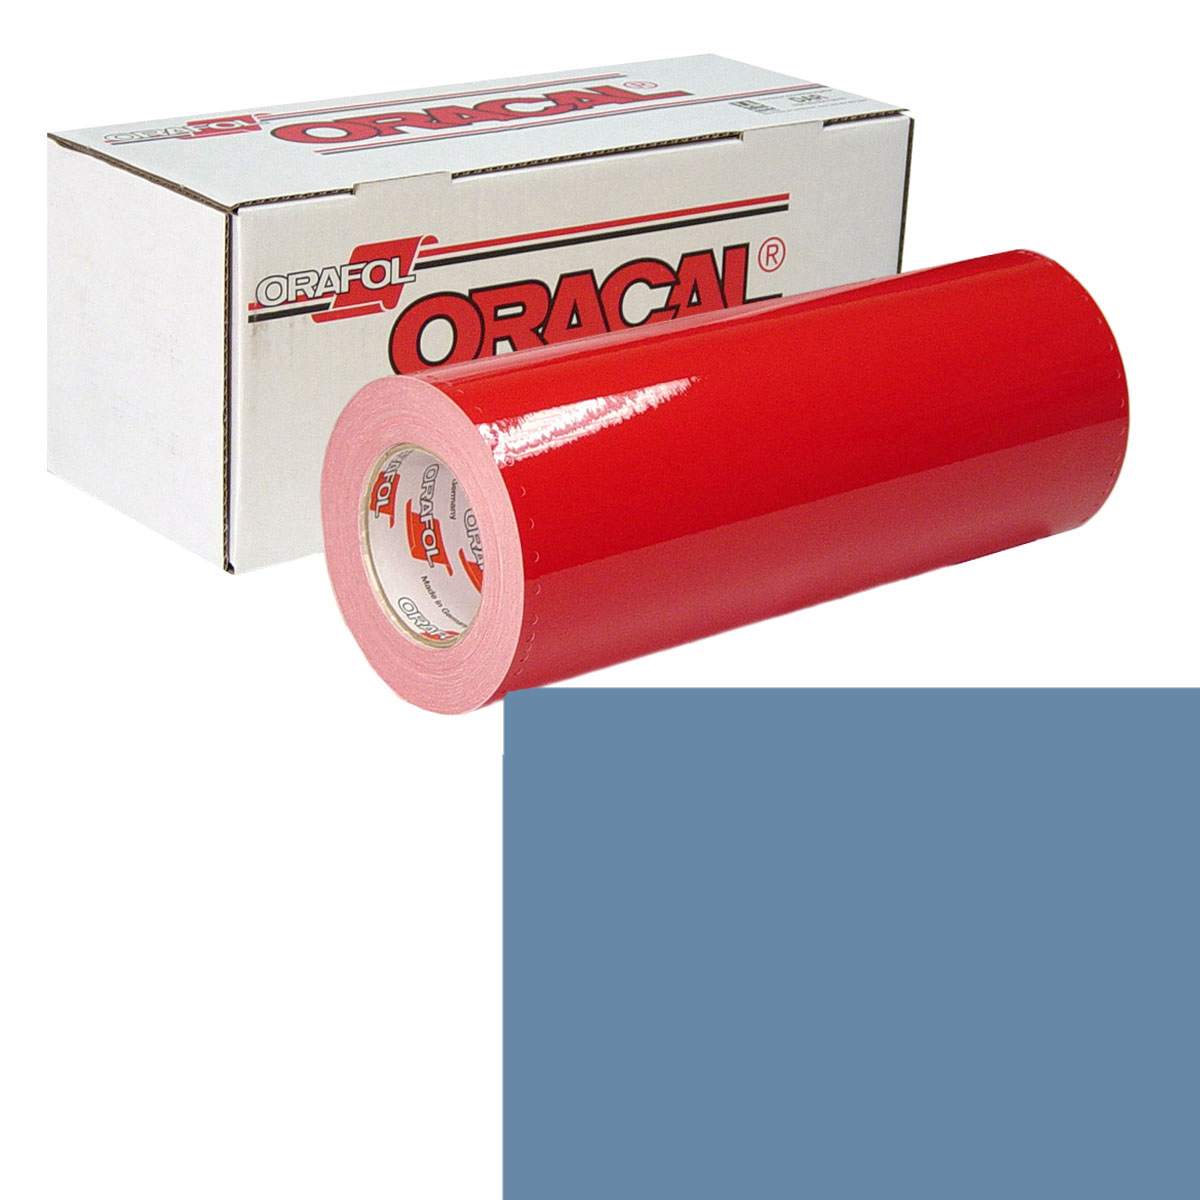 ORACAL 951 15in X 10yd 549 Dove Blue